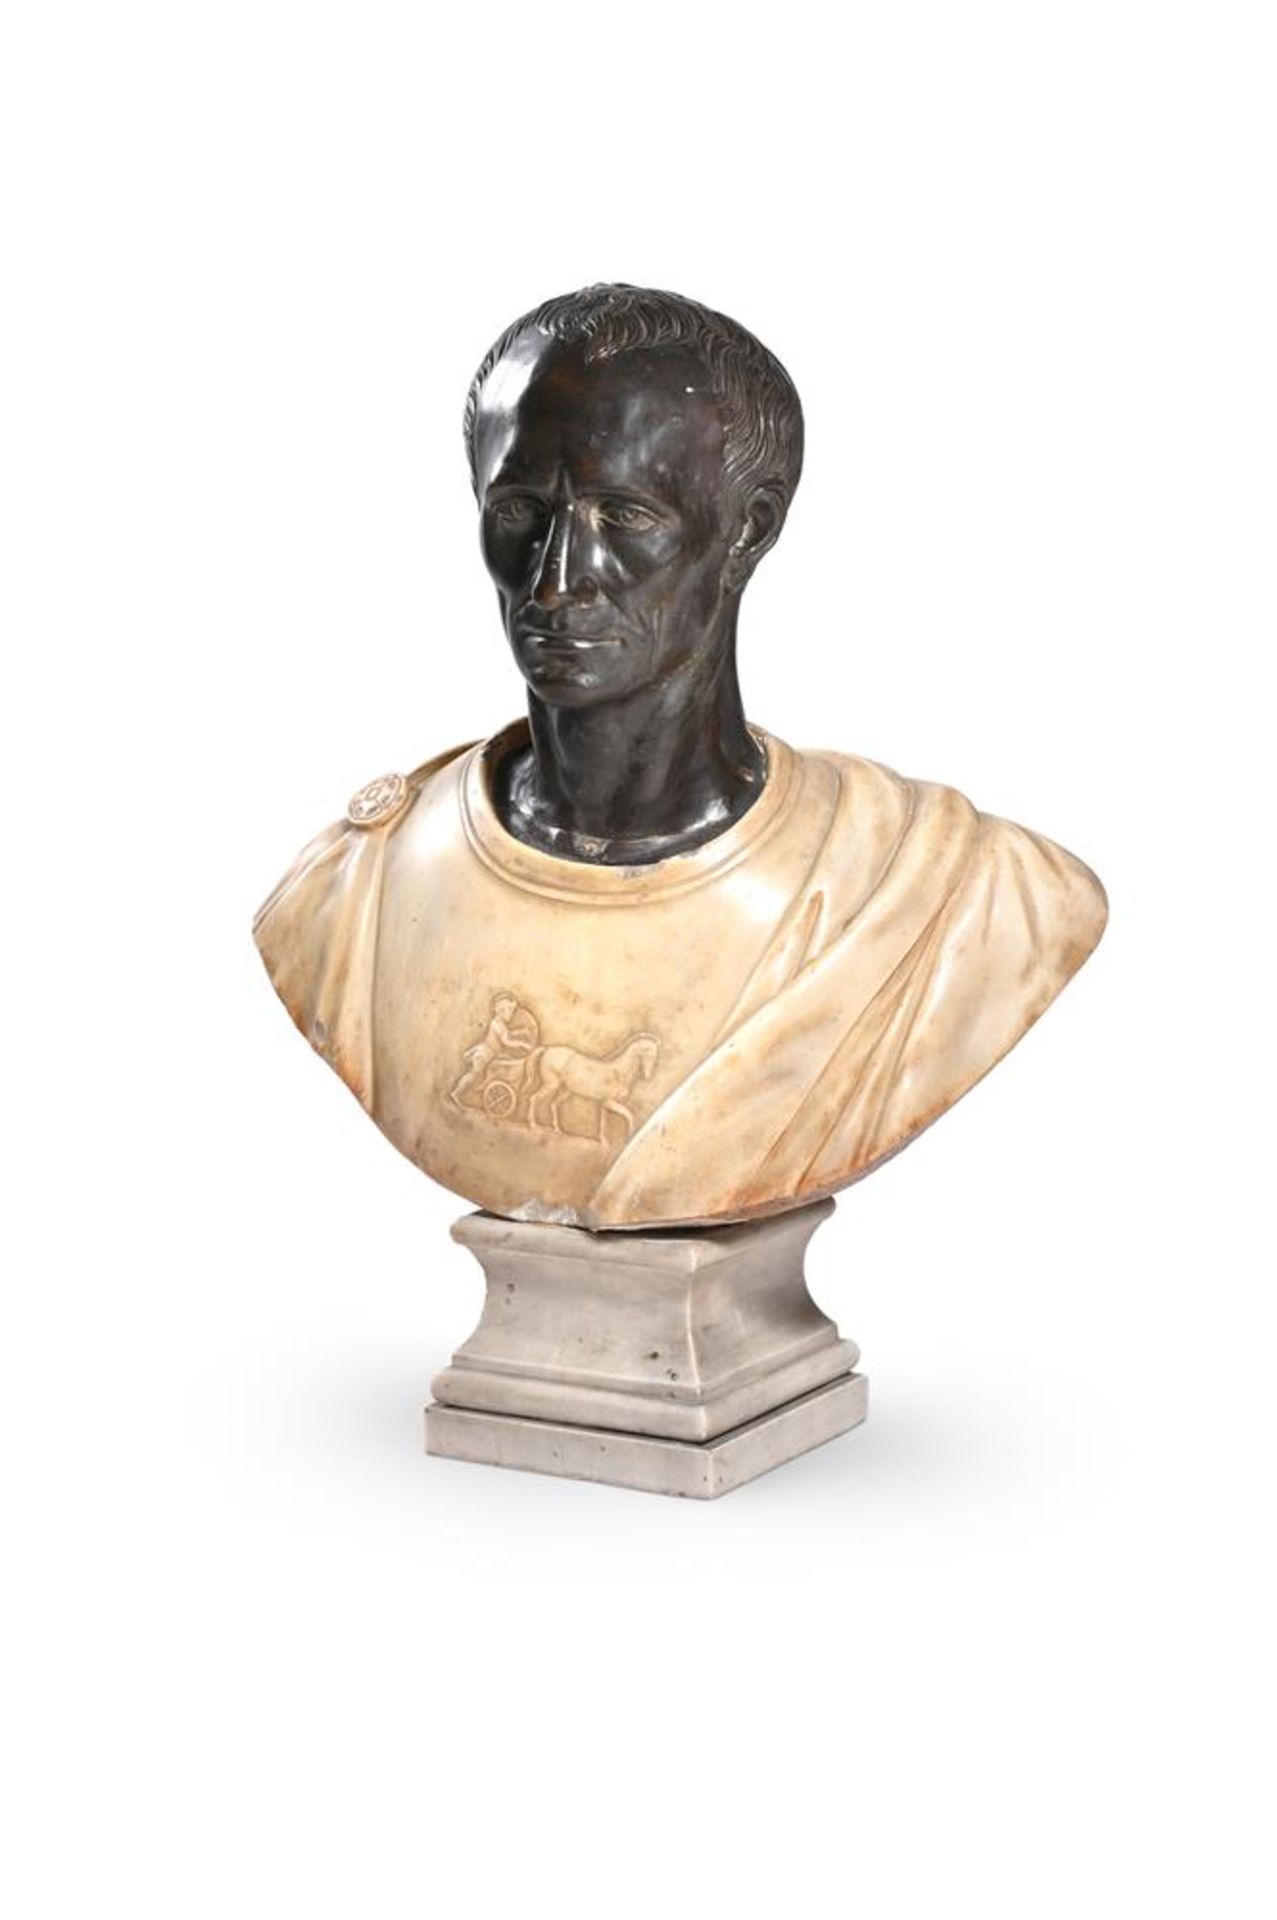 AFTER THE ANTIQUE, A 'GRAND TOUR' BRONZE AND WHITE MARBLE BUST OF JULIUS CAESAR, LATE 18TH CENTURY - Image 2 of 2